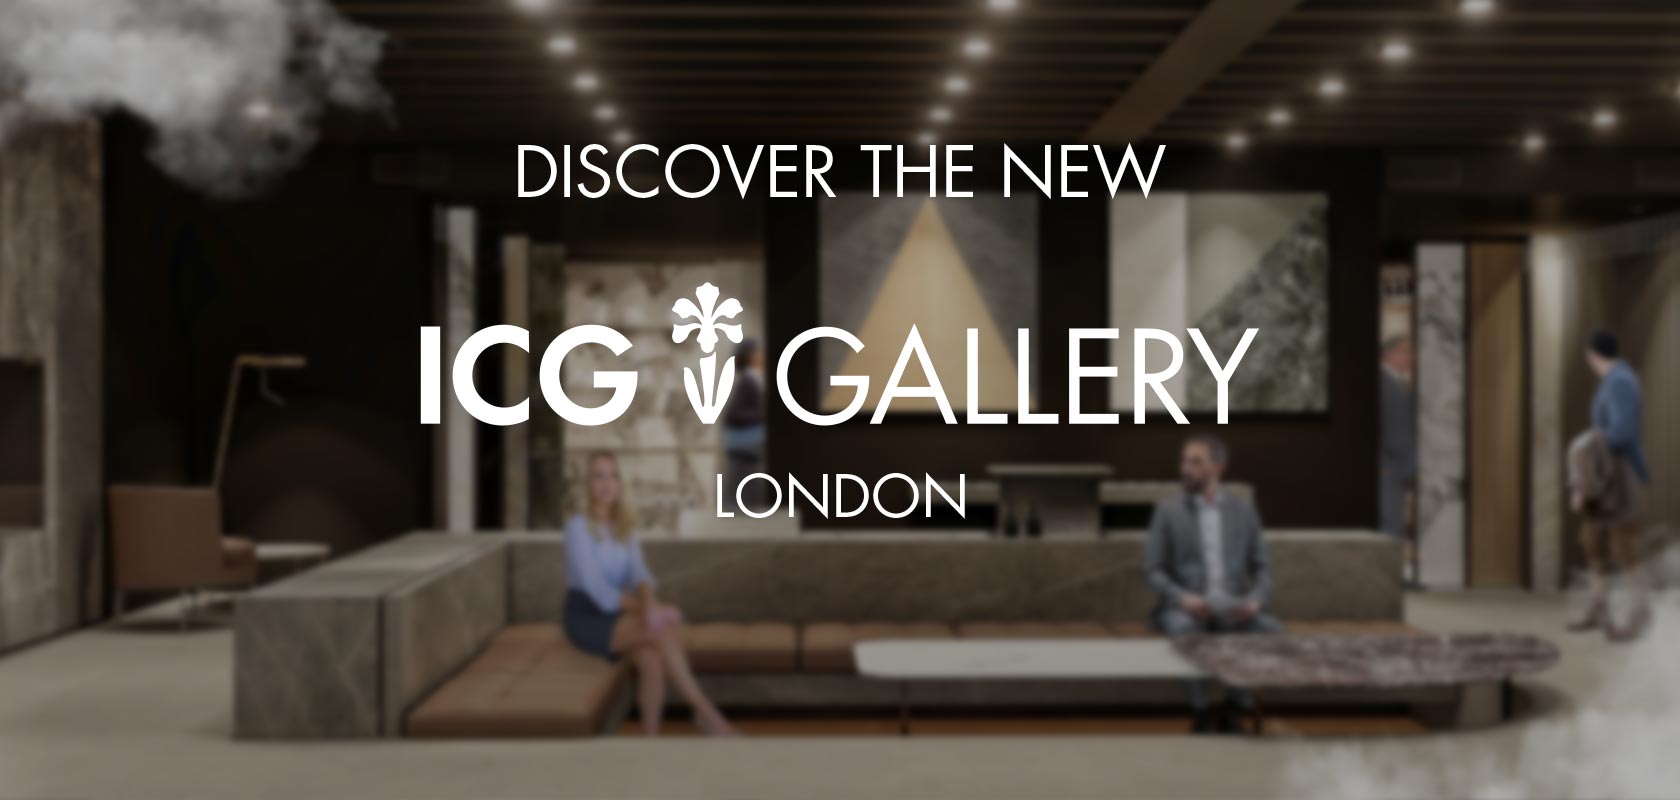 DISCOVER THE NEW ICG GALLERY LONDON